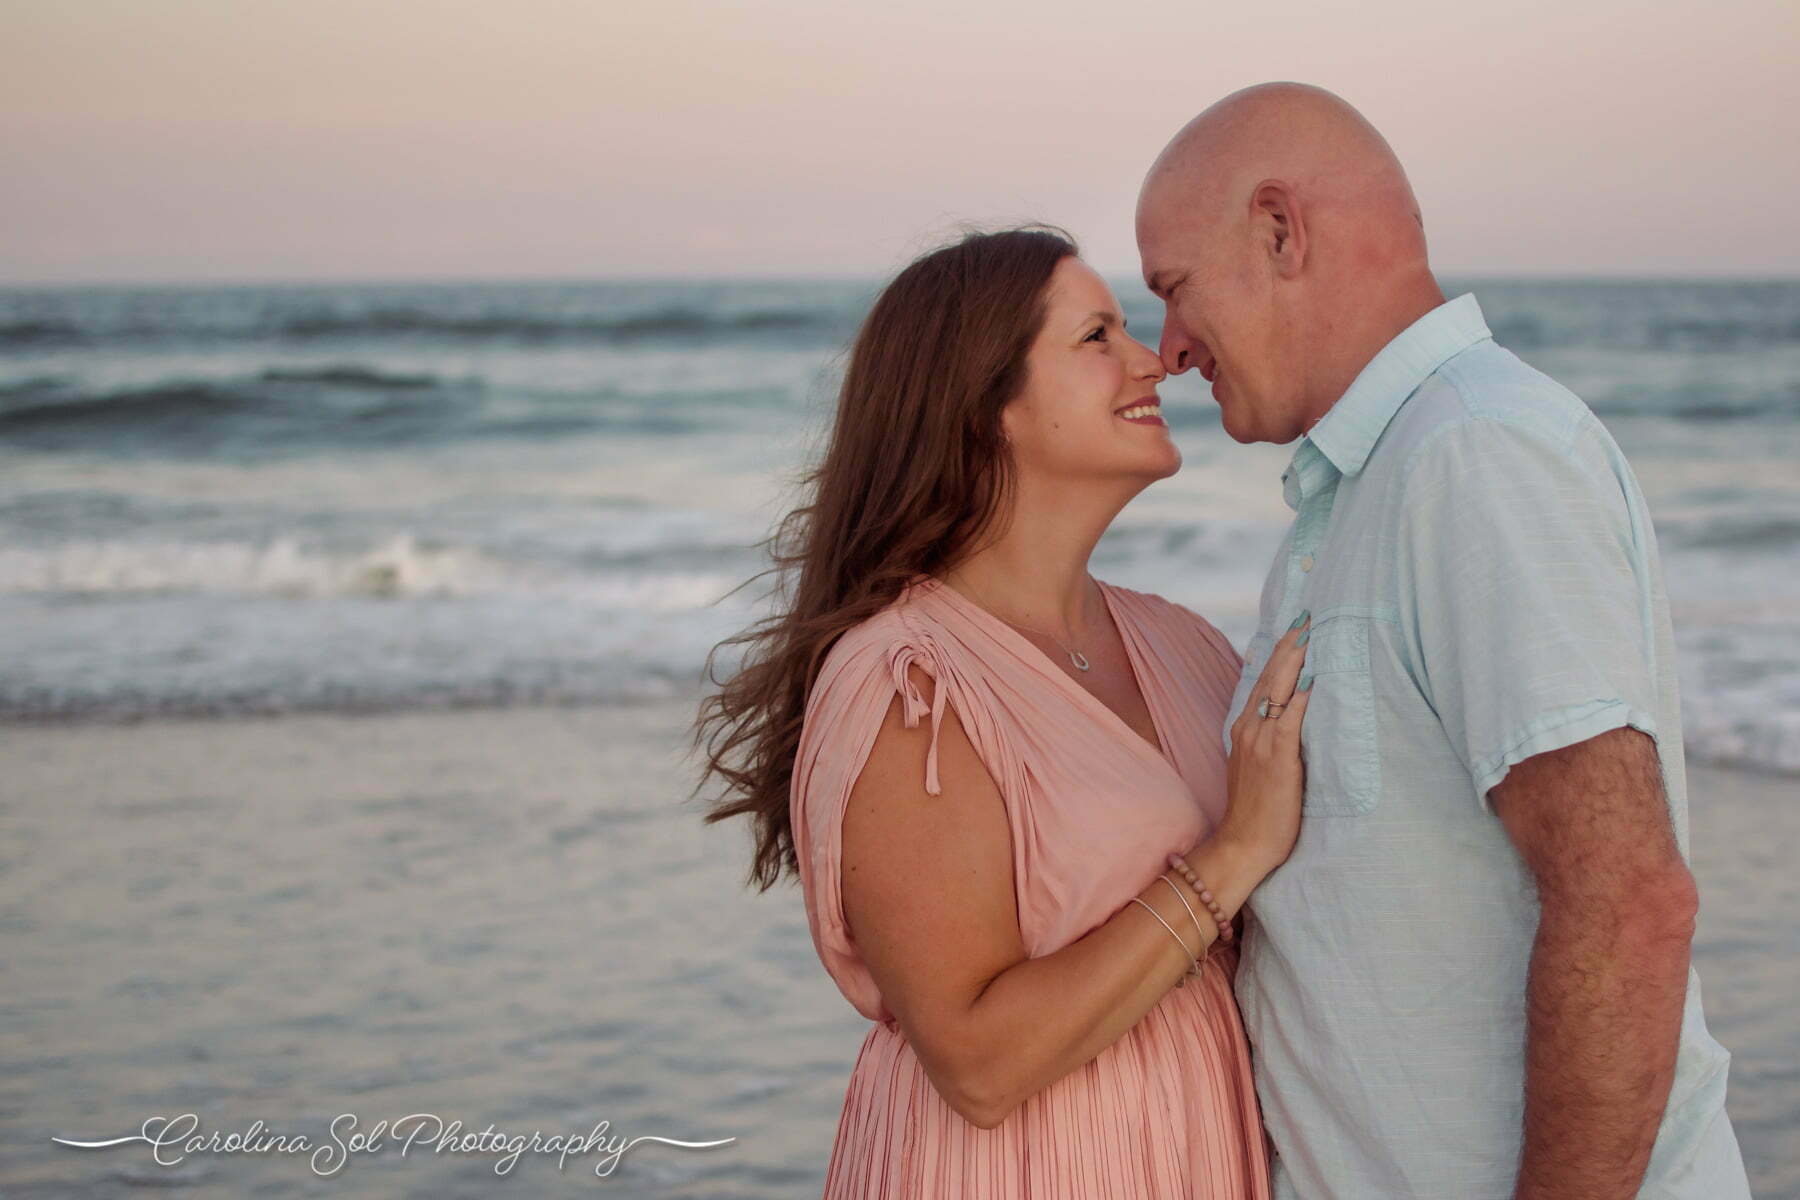 Couple photography session embracing on Wrightsville Beach, NC.